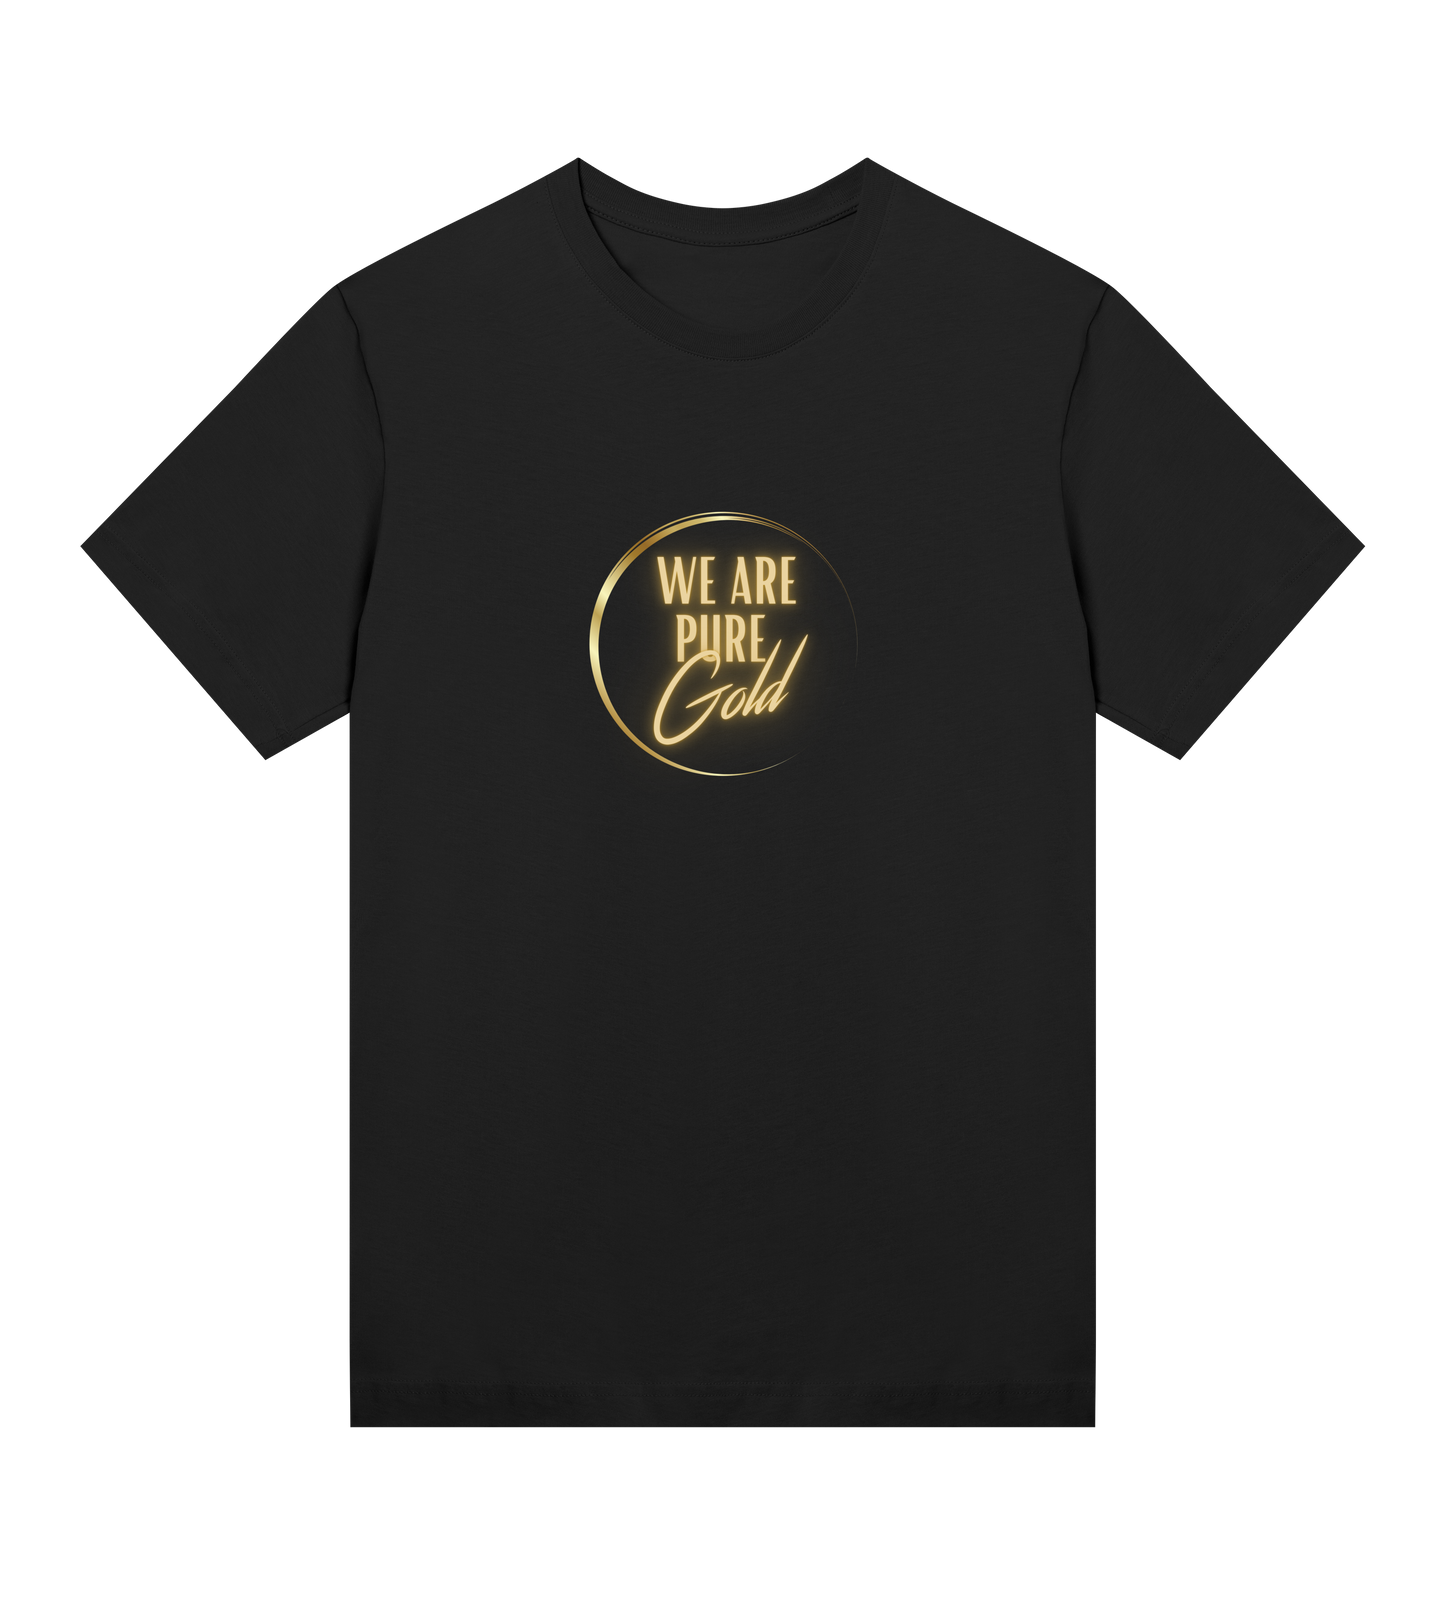 "We are pure gold" Womens Tee